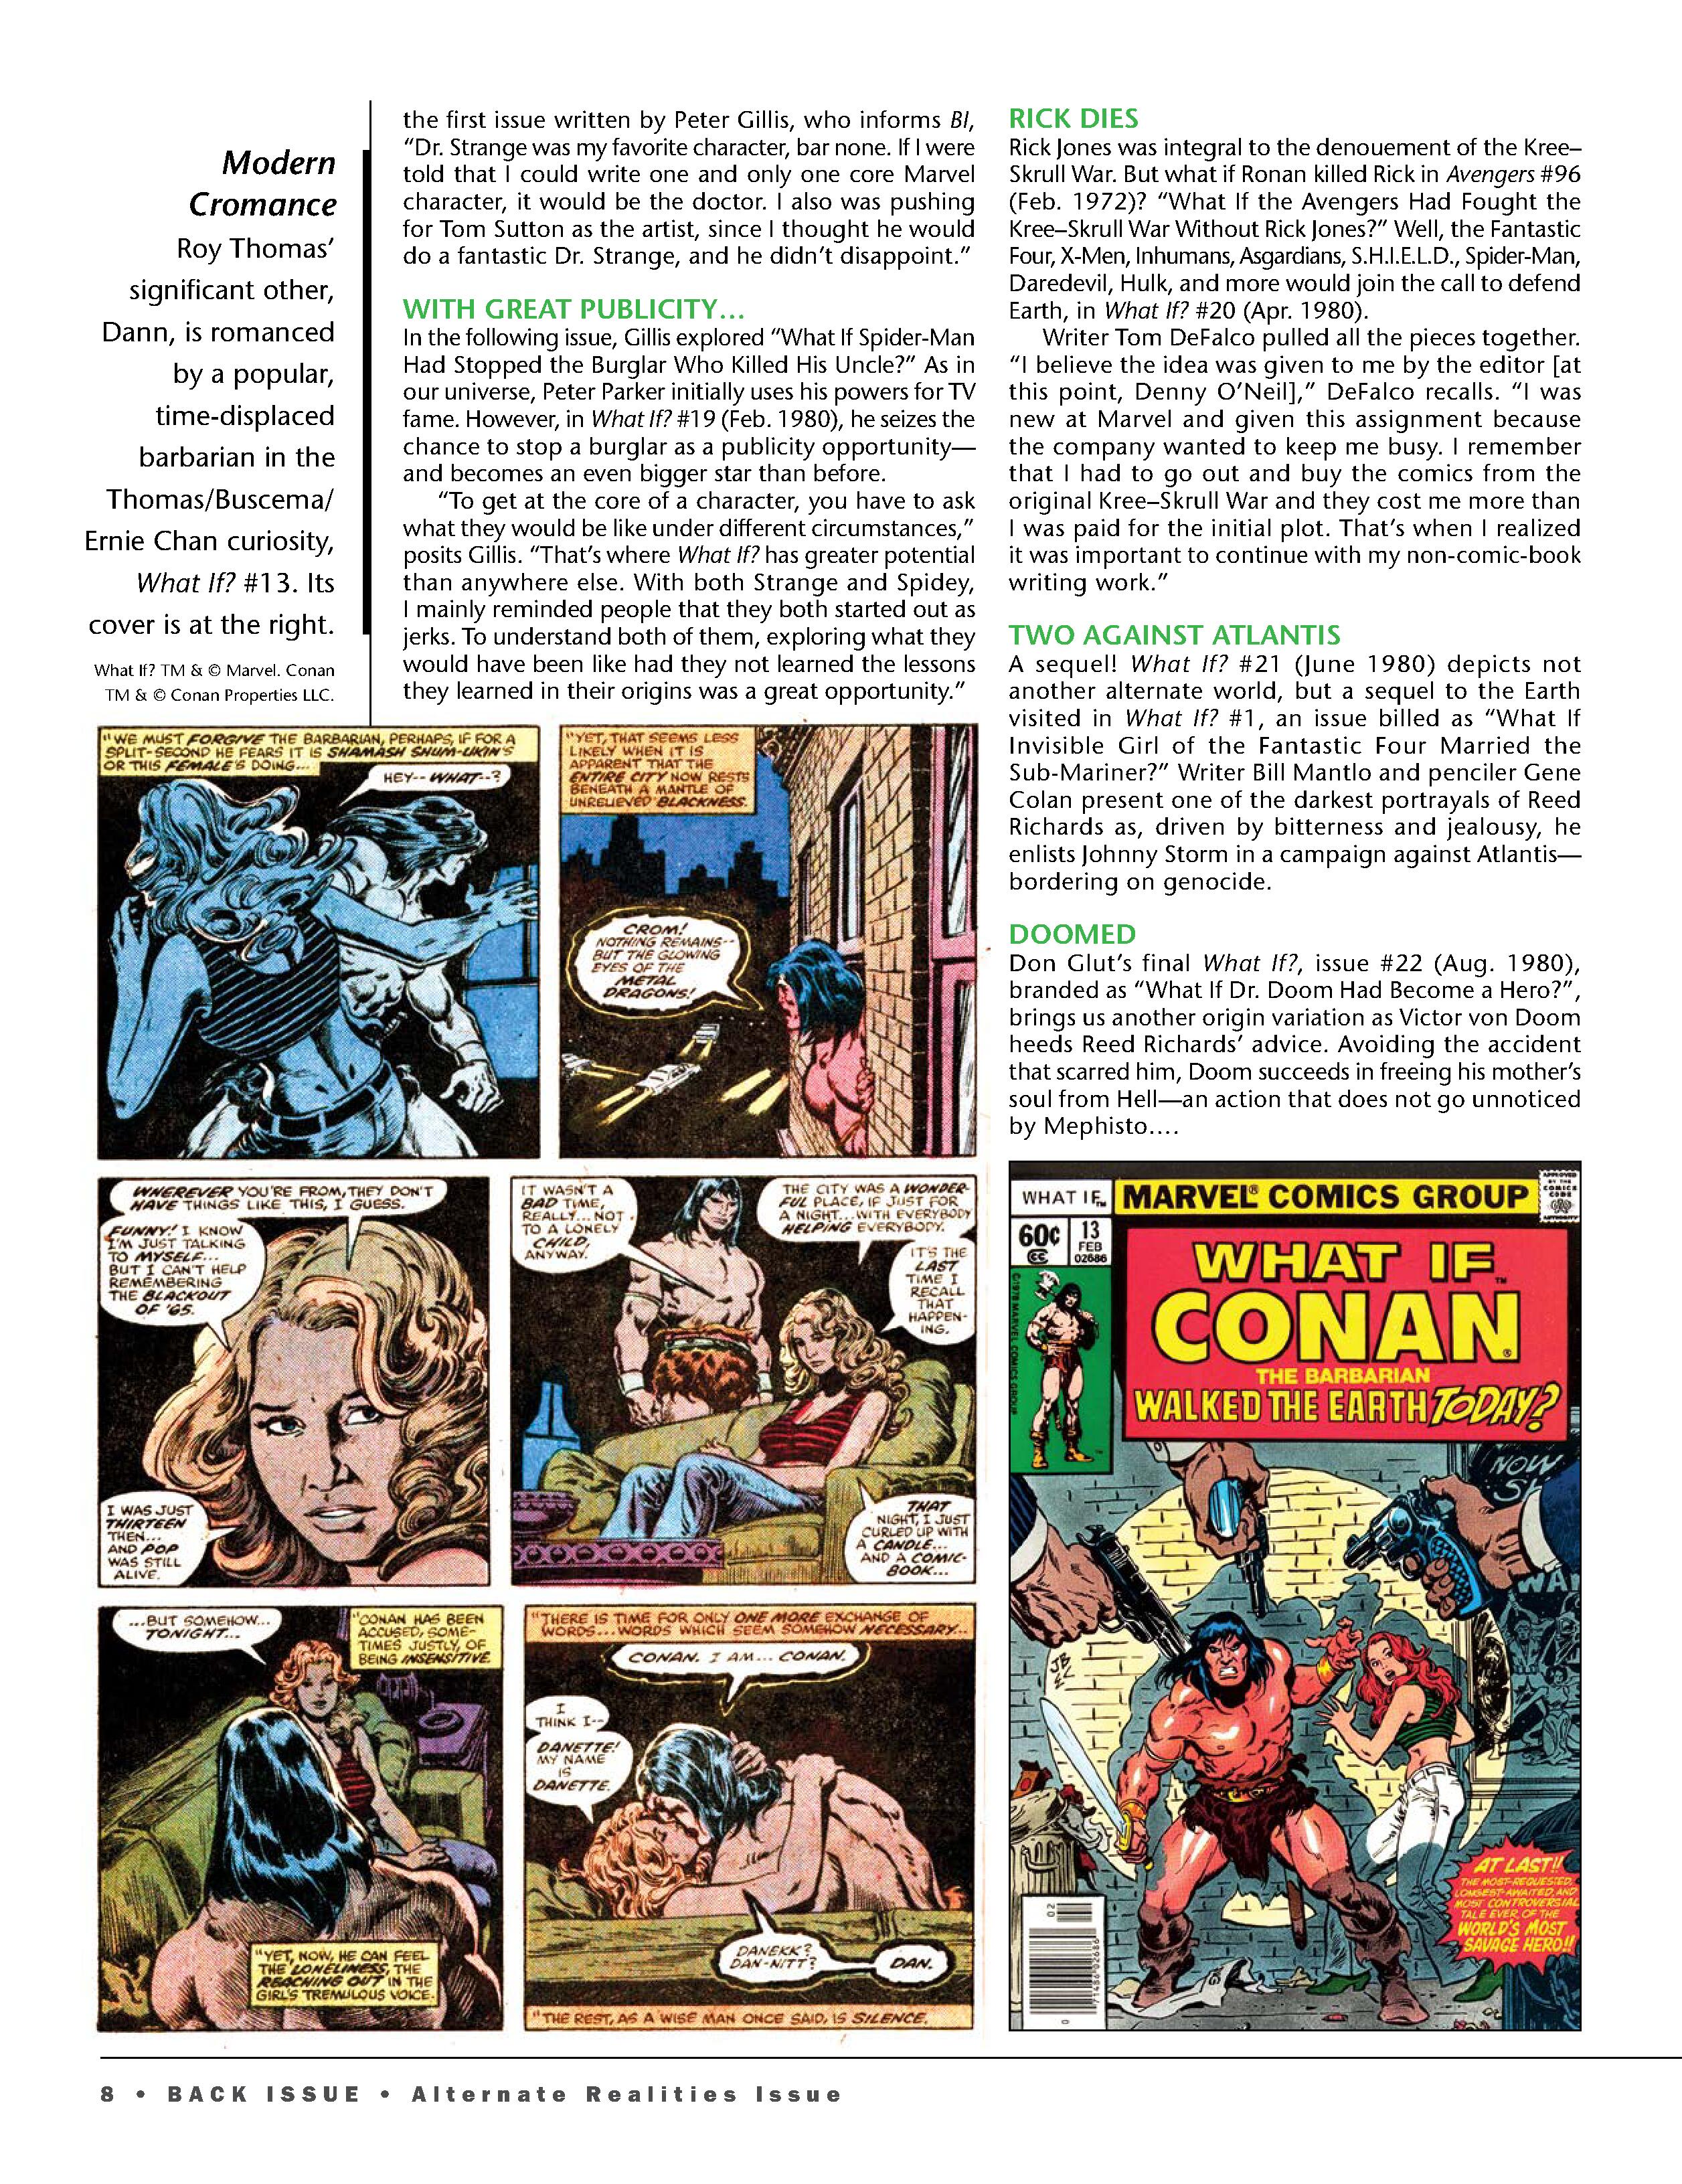 Read online Back Issue comic -  Issue #111 - 10